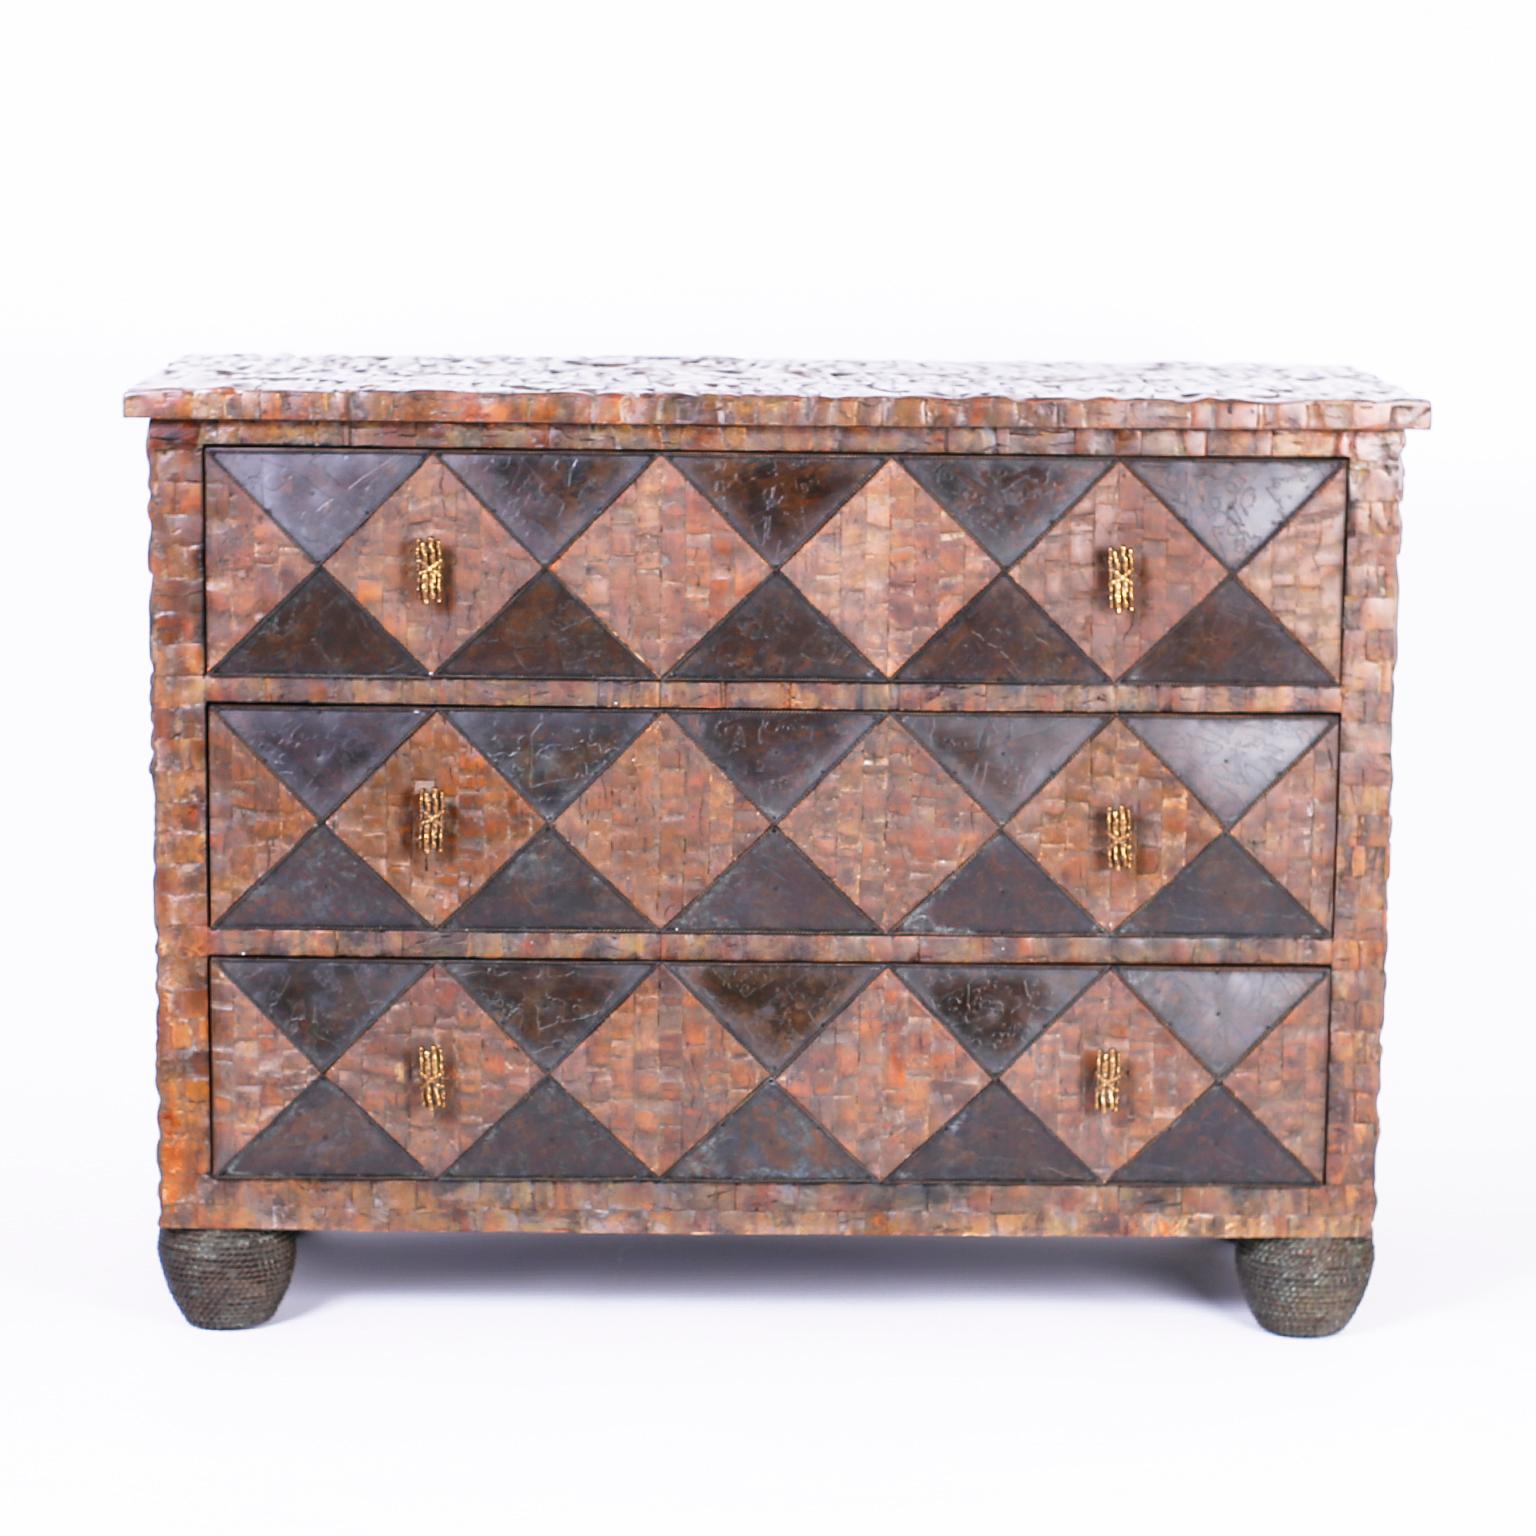 A three drawer chest or commode entirely clad with a coconut shell mosaic with harlequin drawer fronts and set on faux string bun feet. Signed Maitland-Smith in a drawer.